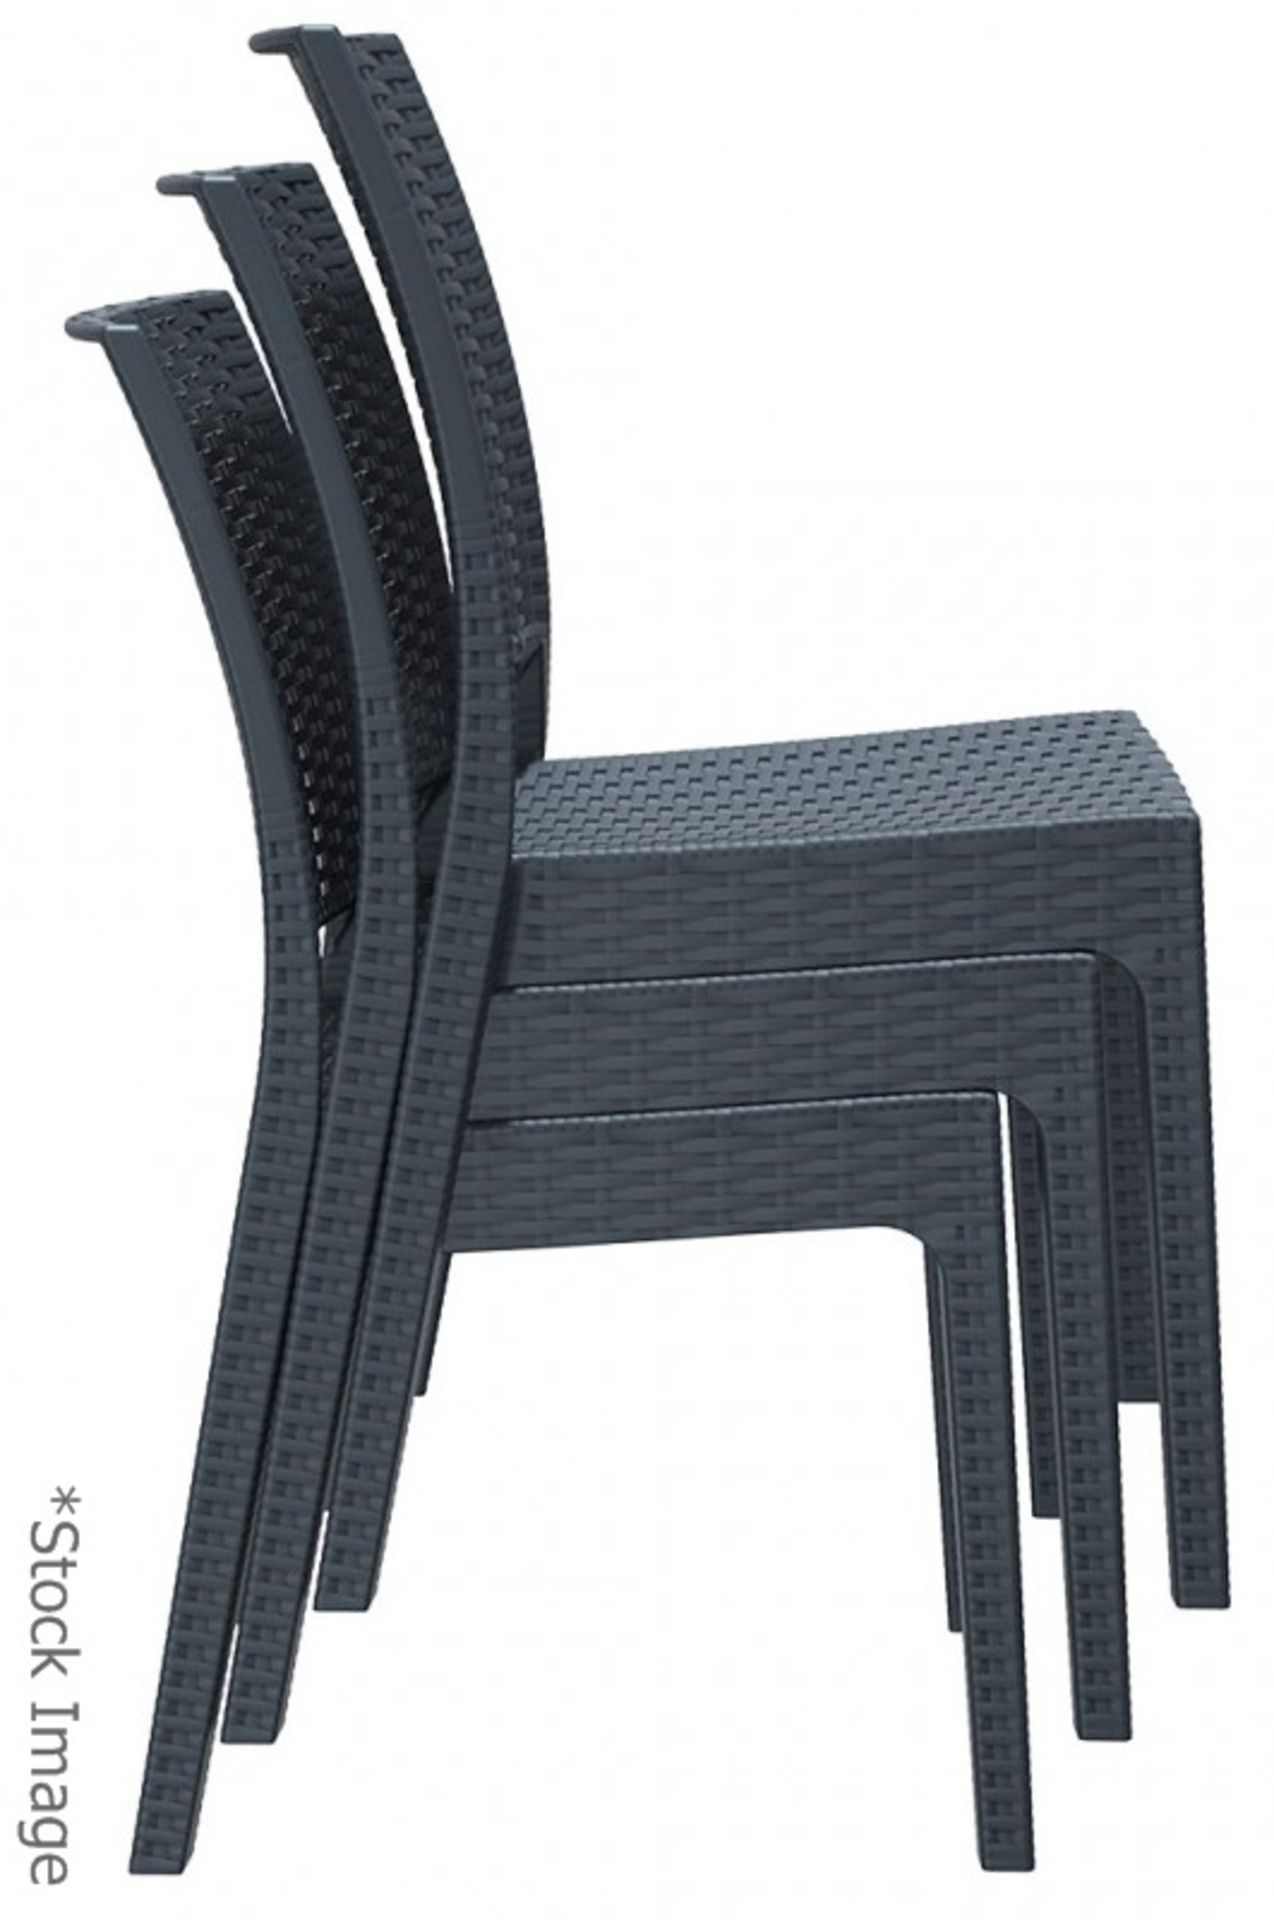 Commercial Outdoor Table & Chair Set - Includes 1 x Folding Bistro Table and 4 x Stackable Rattan- - Image 16 of 20